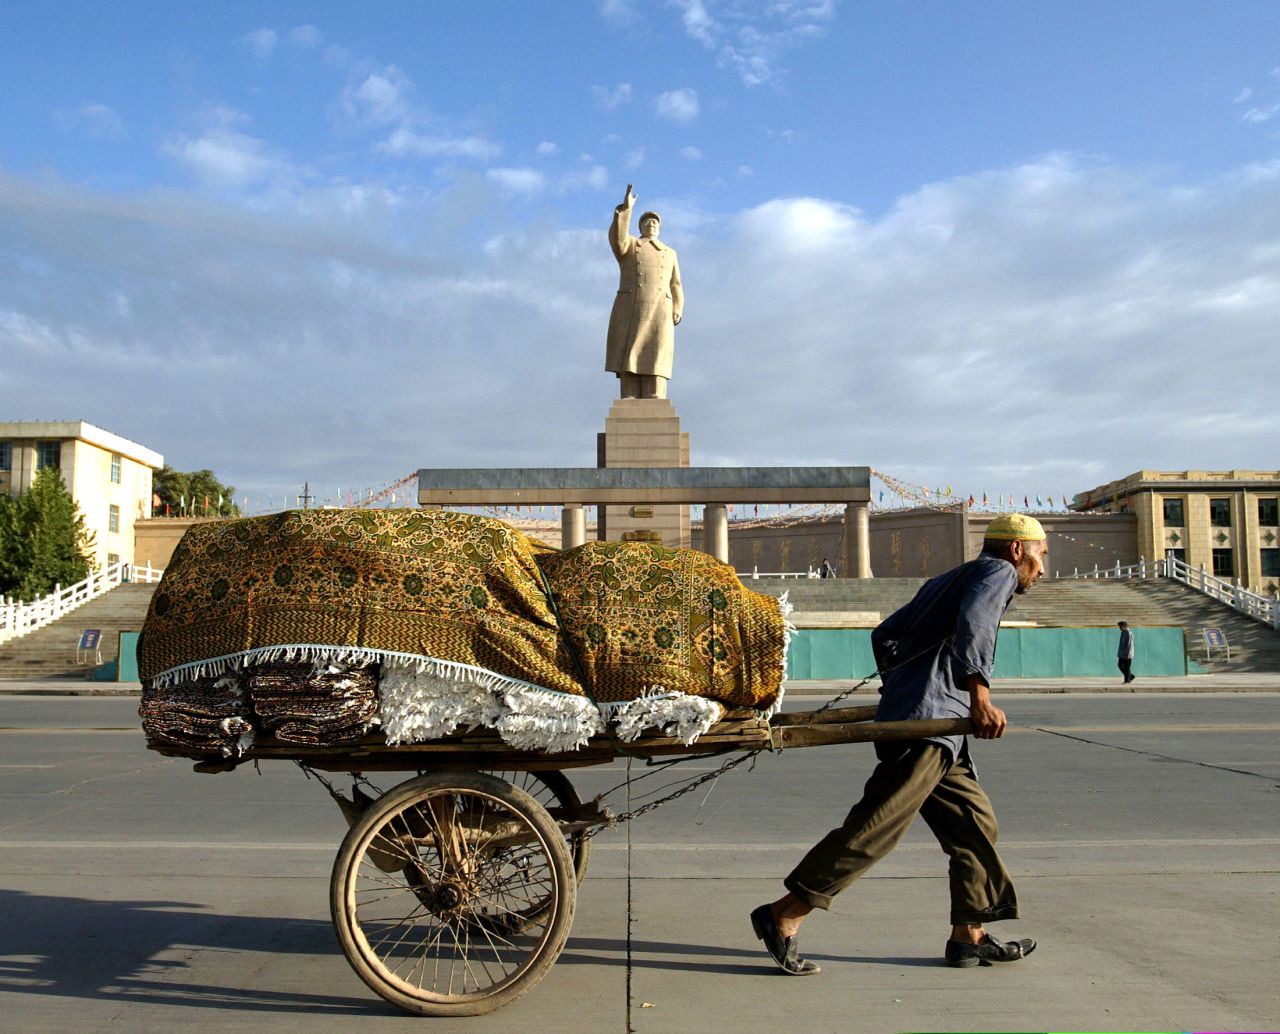 A Uyghur worker pulls a cart past a giant Mao statue at the People's Square in Kashgar, China, in September 2003.